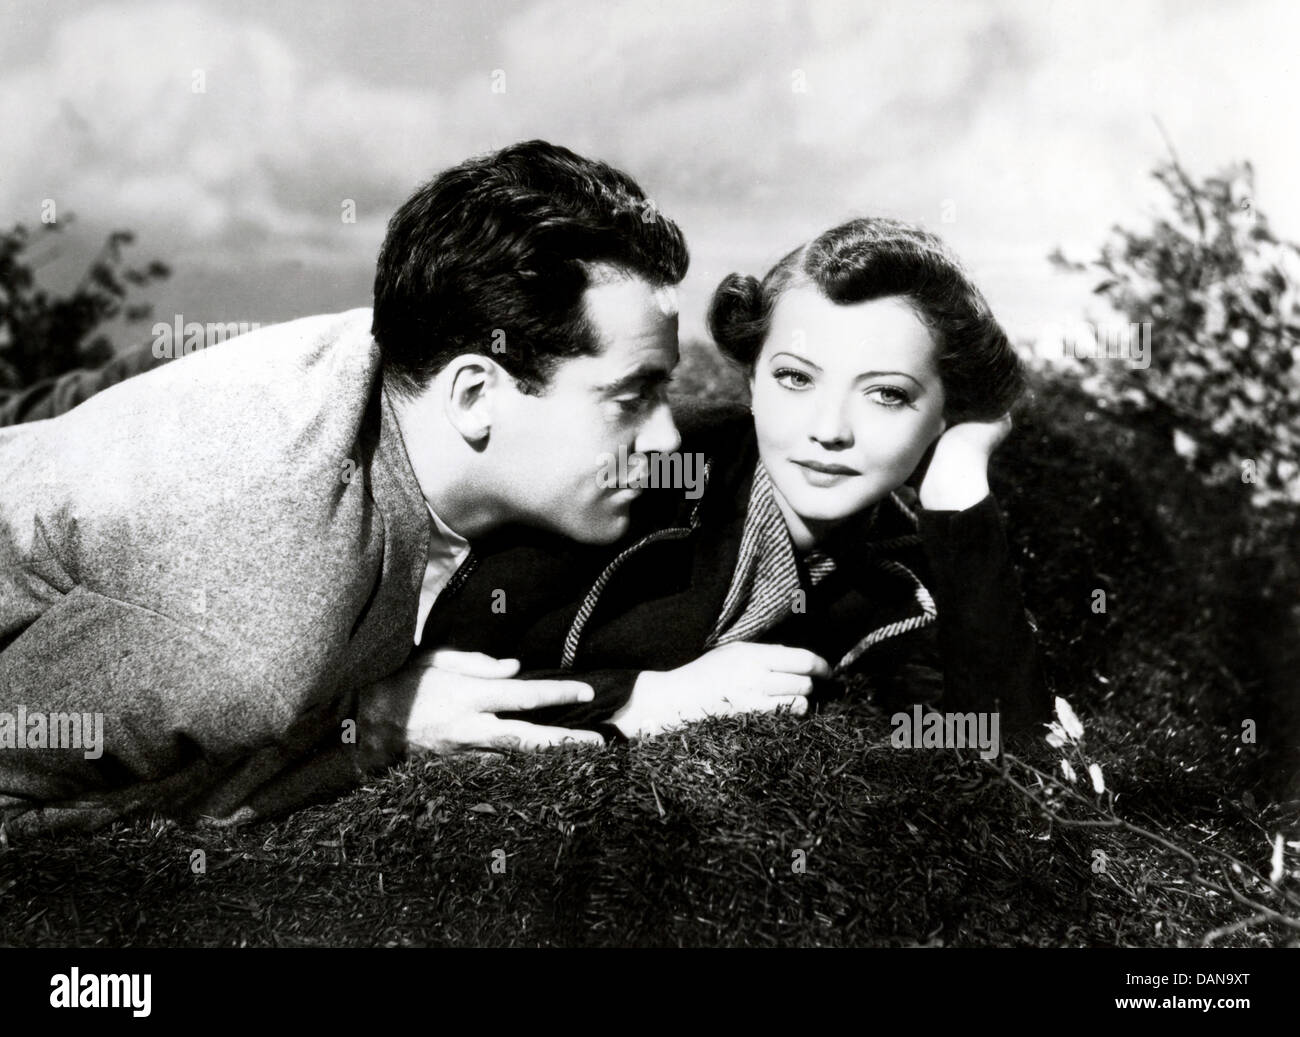 YOU ONLY LIVE ONCE (1937) HENRY FONDA, SYLVIA SIDNEY, FRITZ LANG (DIR) YOLO 003 MOVIESTORE COLLECTION LTD Stock Photo